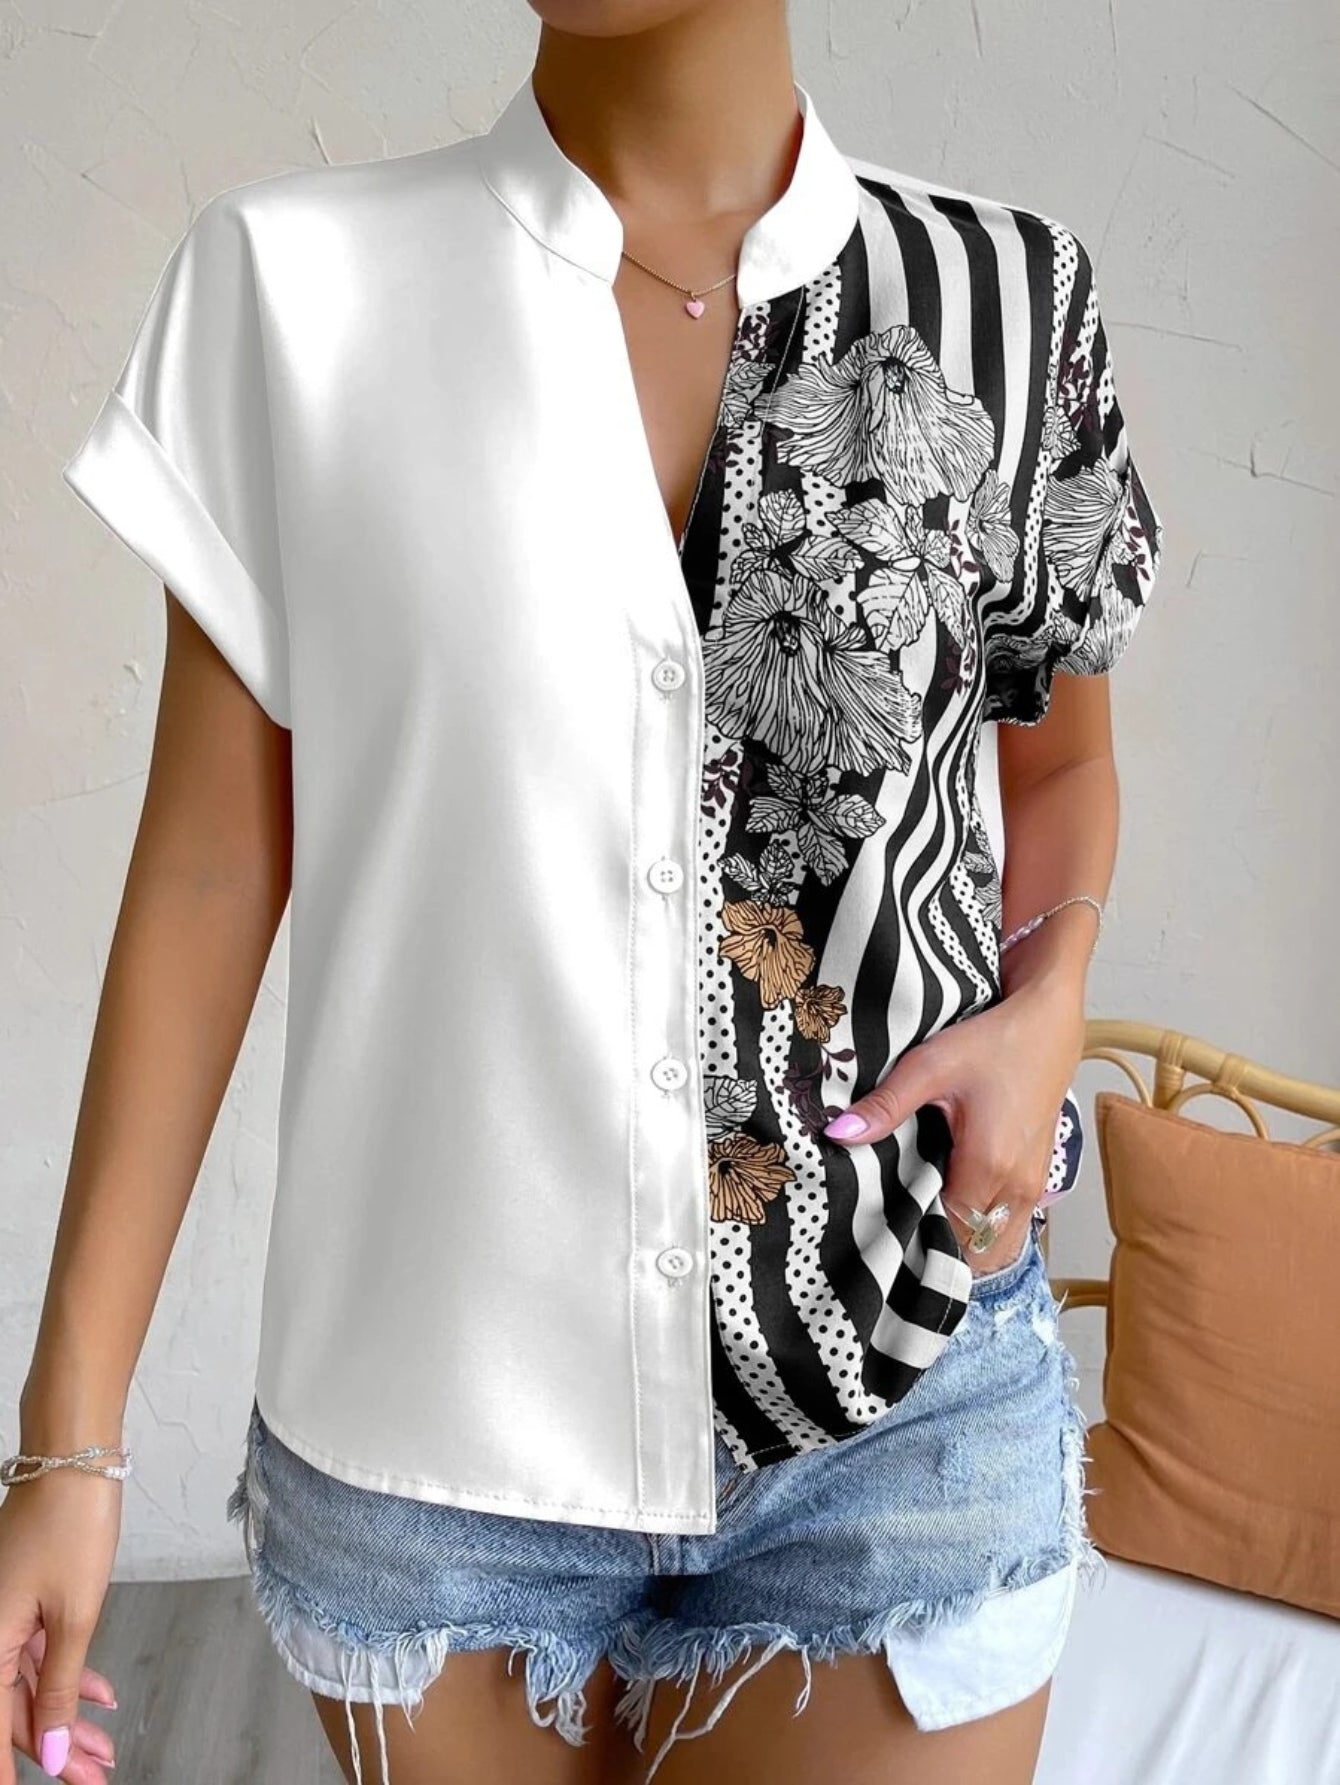 Women's Floral Print Contrast Blouse - Casual Cap Sleeve Collar Top for Effortless Style